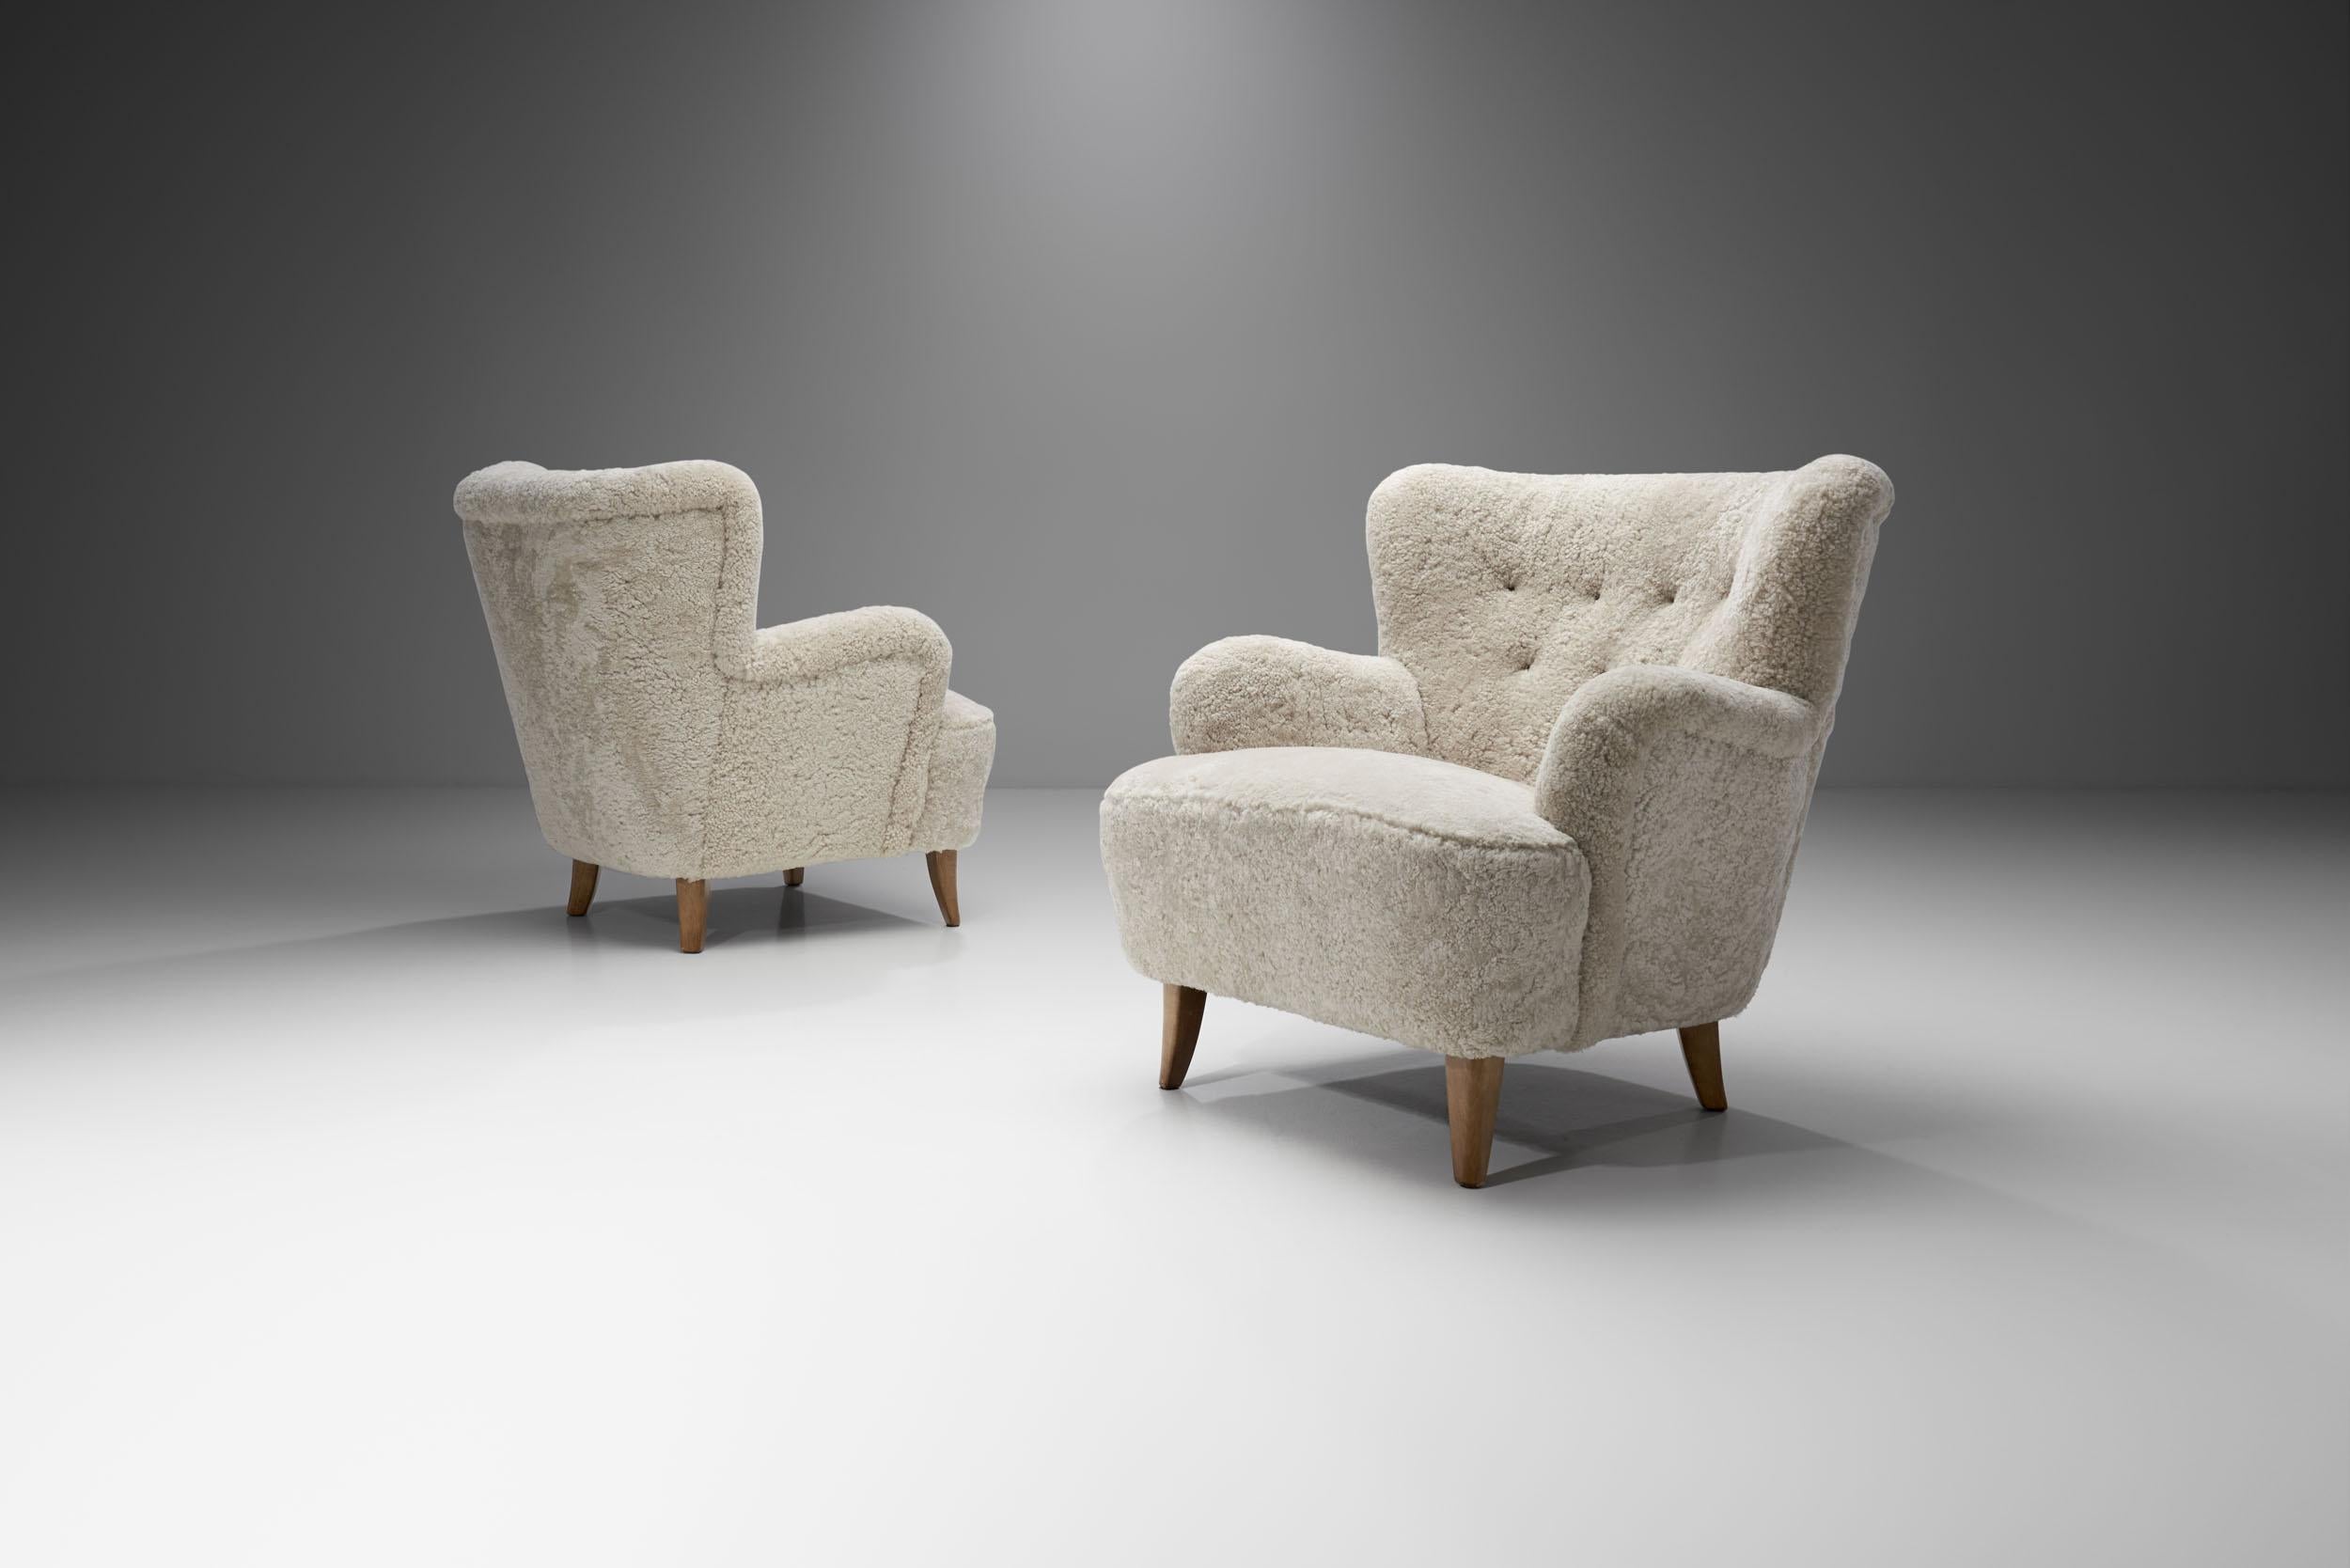 The “Laila” model by the Finnish designer, Ilmari Lappalainen, originates from 1948, with the earliest original drawings kept in the Lahti City Museum in their Lappalainen Collection. 

This pair of “nr. 238” armchairs are from the Finnish